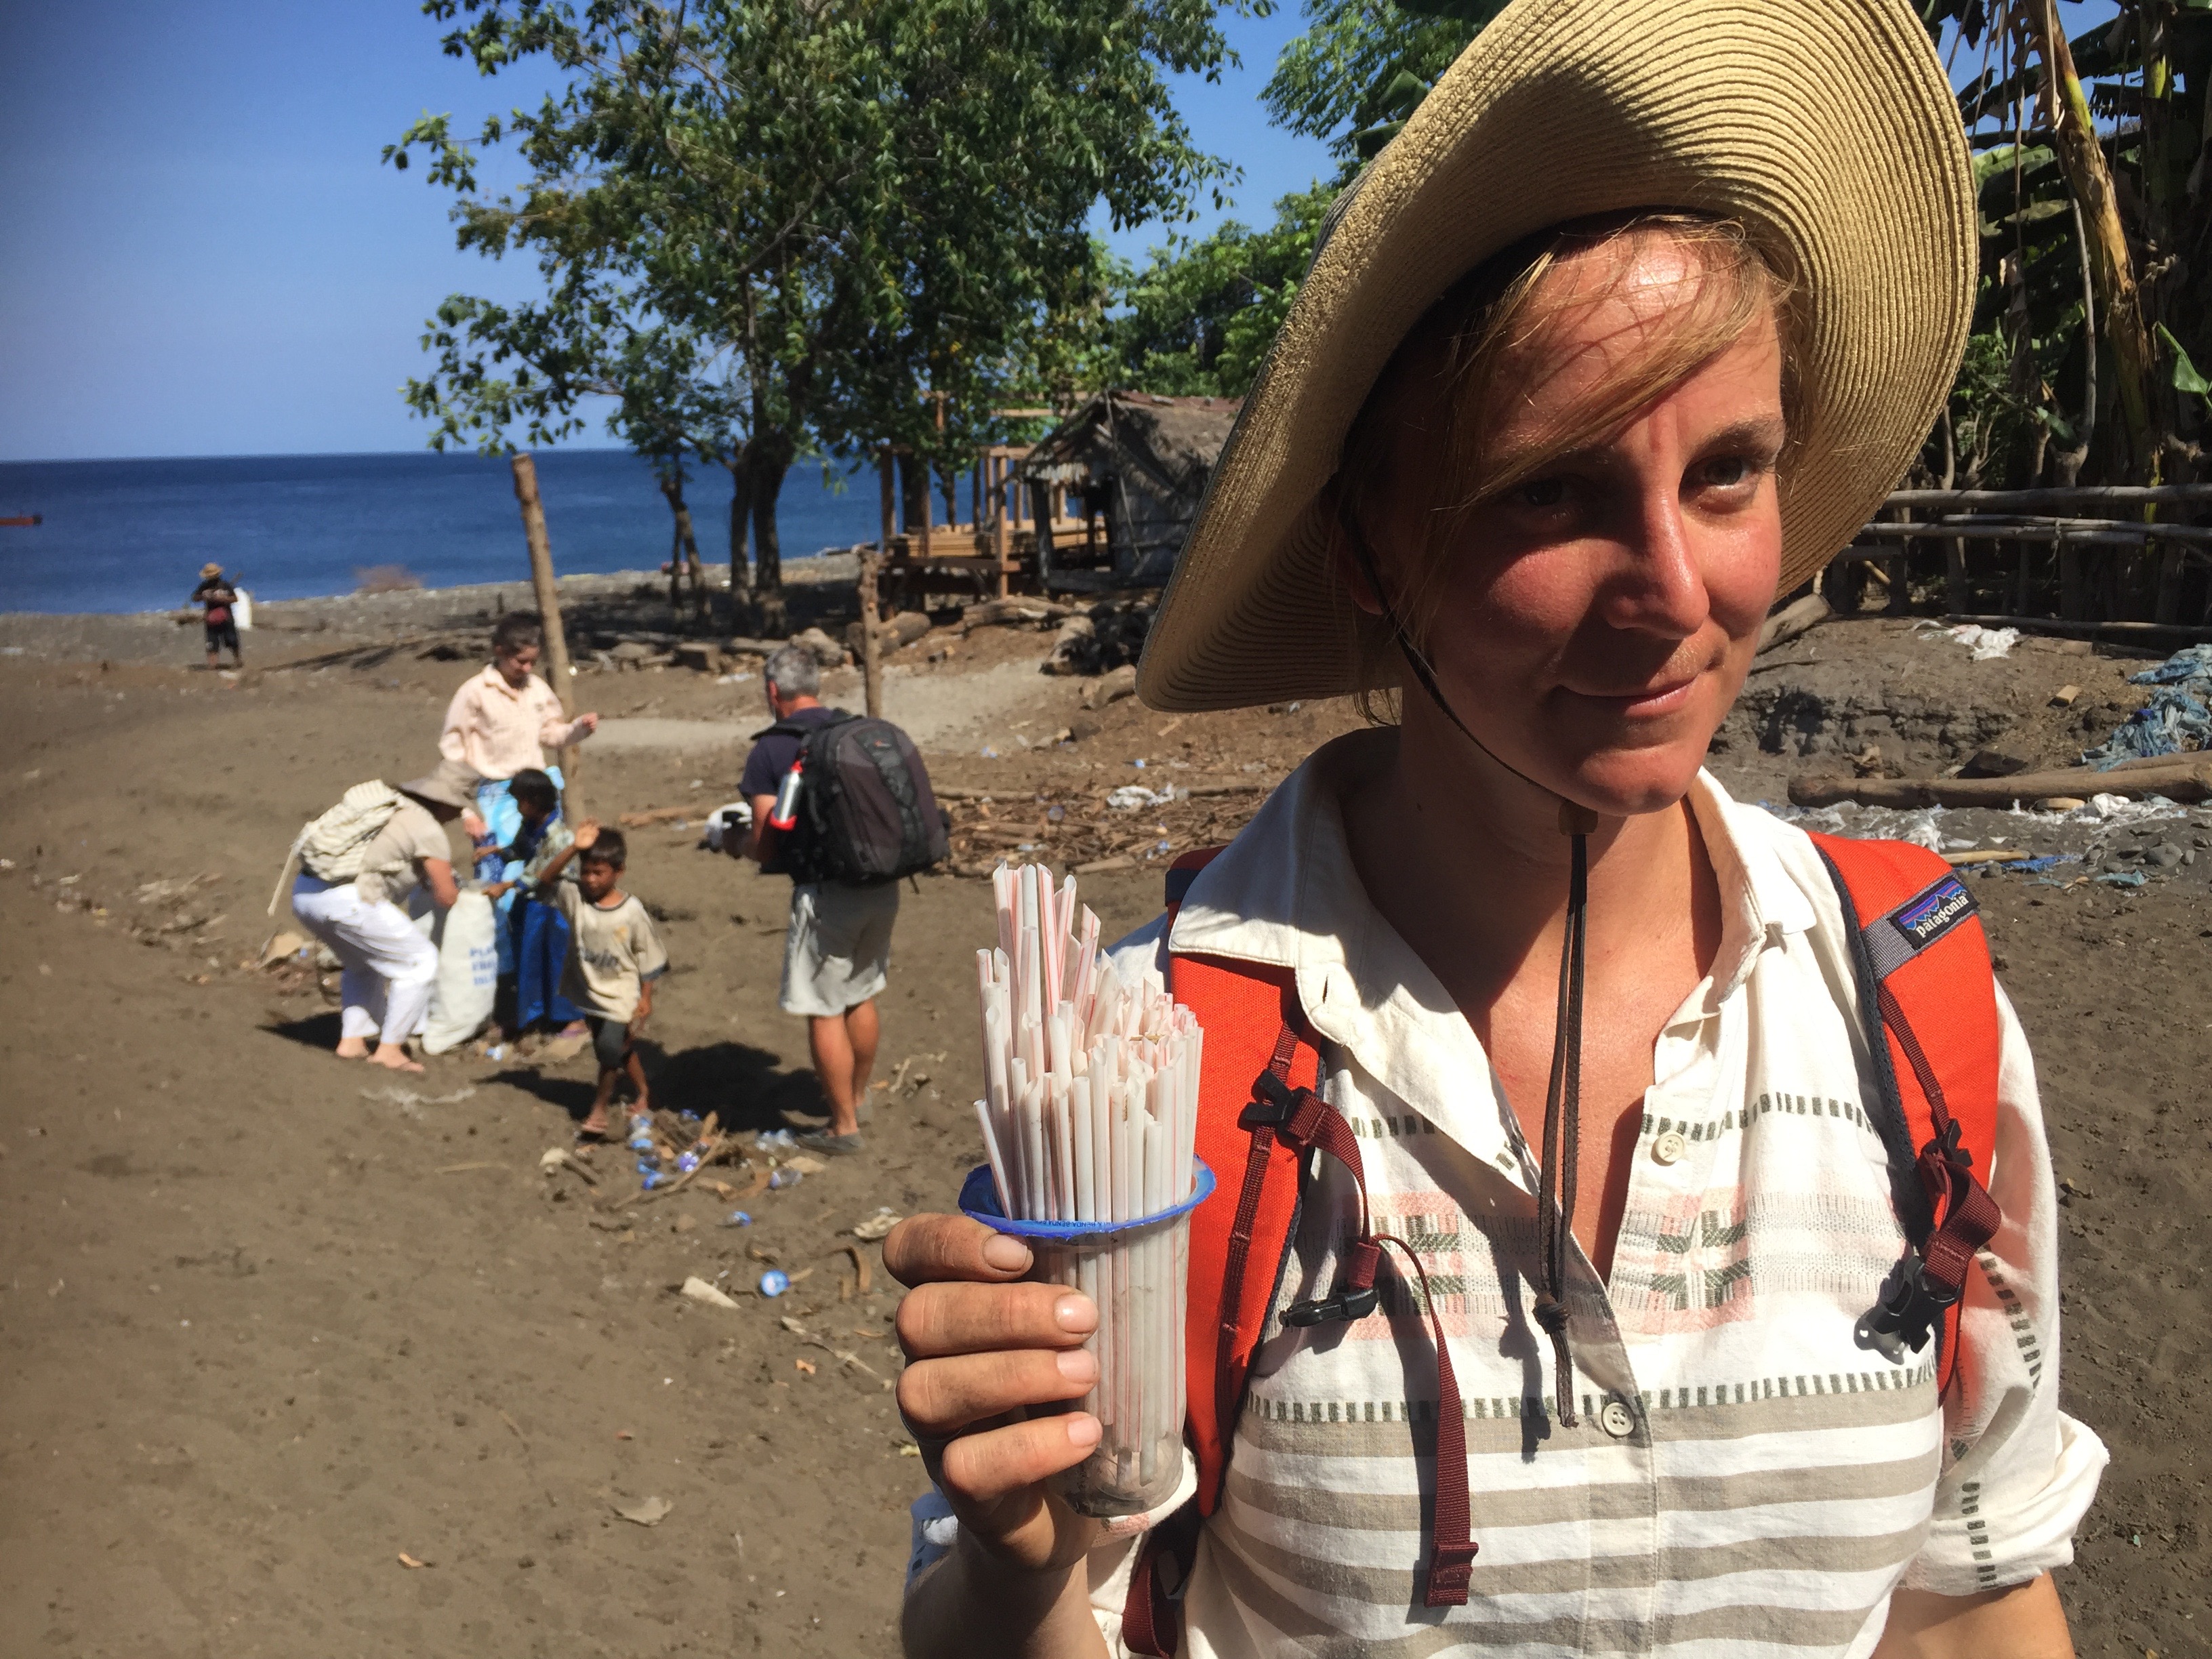 ﻿﻿The Depth of our Plastic Problem: Microplastics Researcher Abby Barrows’ firsthand account from the Oceanic Society Expedition